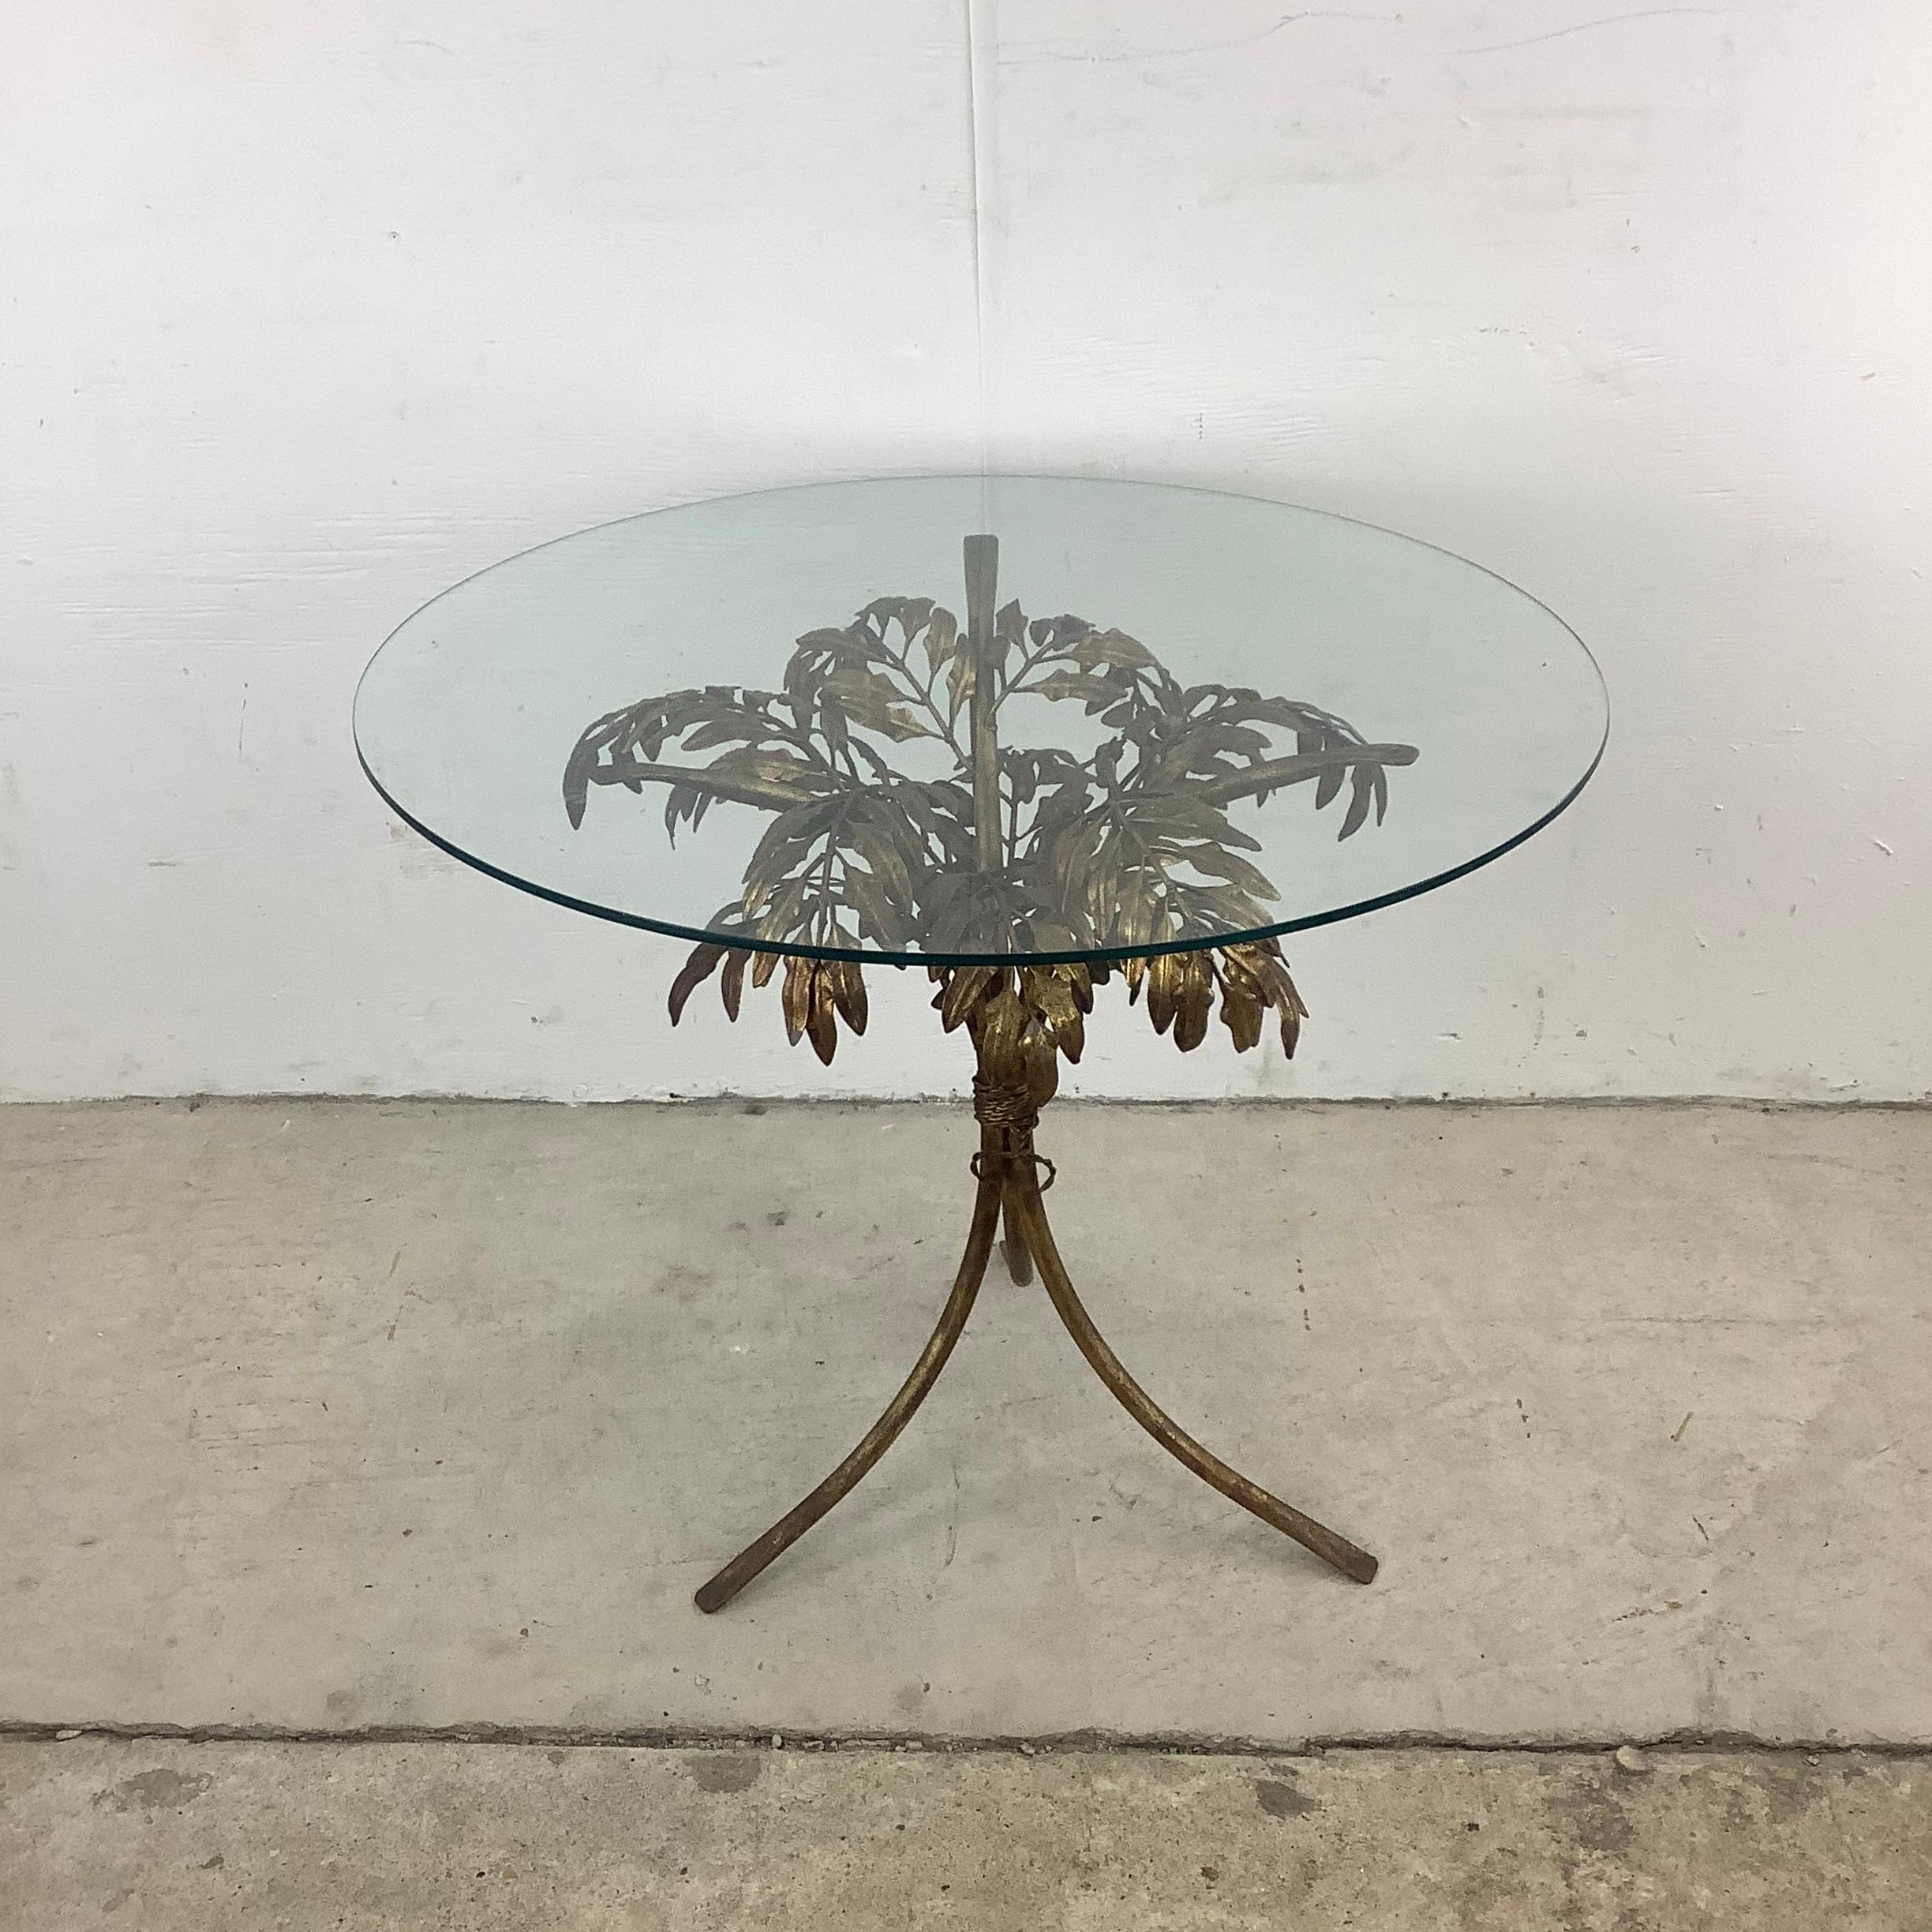 This unique Hollywood Regency Arthur Court style end table features a floral sheath brass finish pedestal base with a circular glass top. Perfect accent table for use as a lamp table, sofa side table, or display pedestal in any setting.

Dimensions: